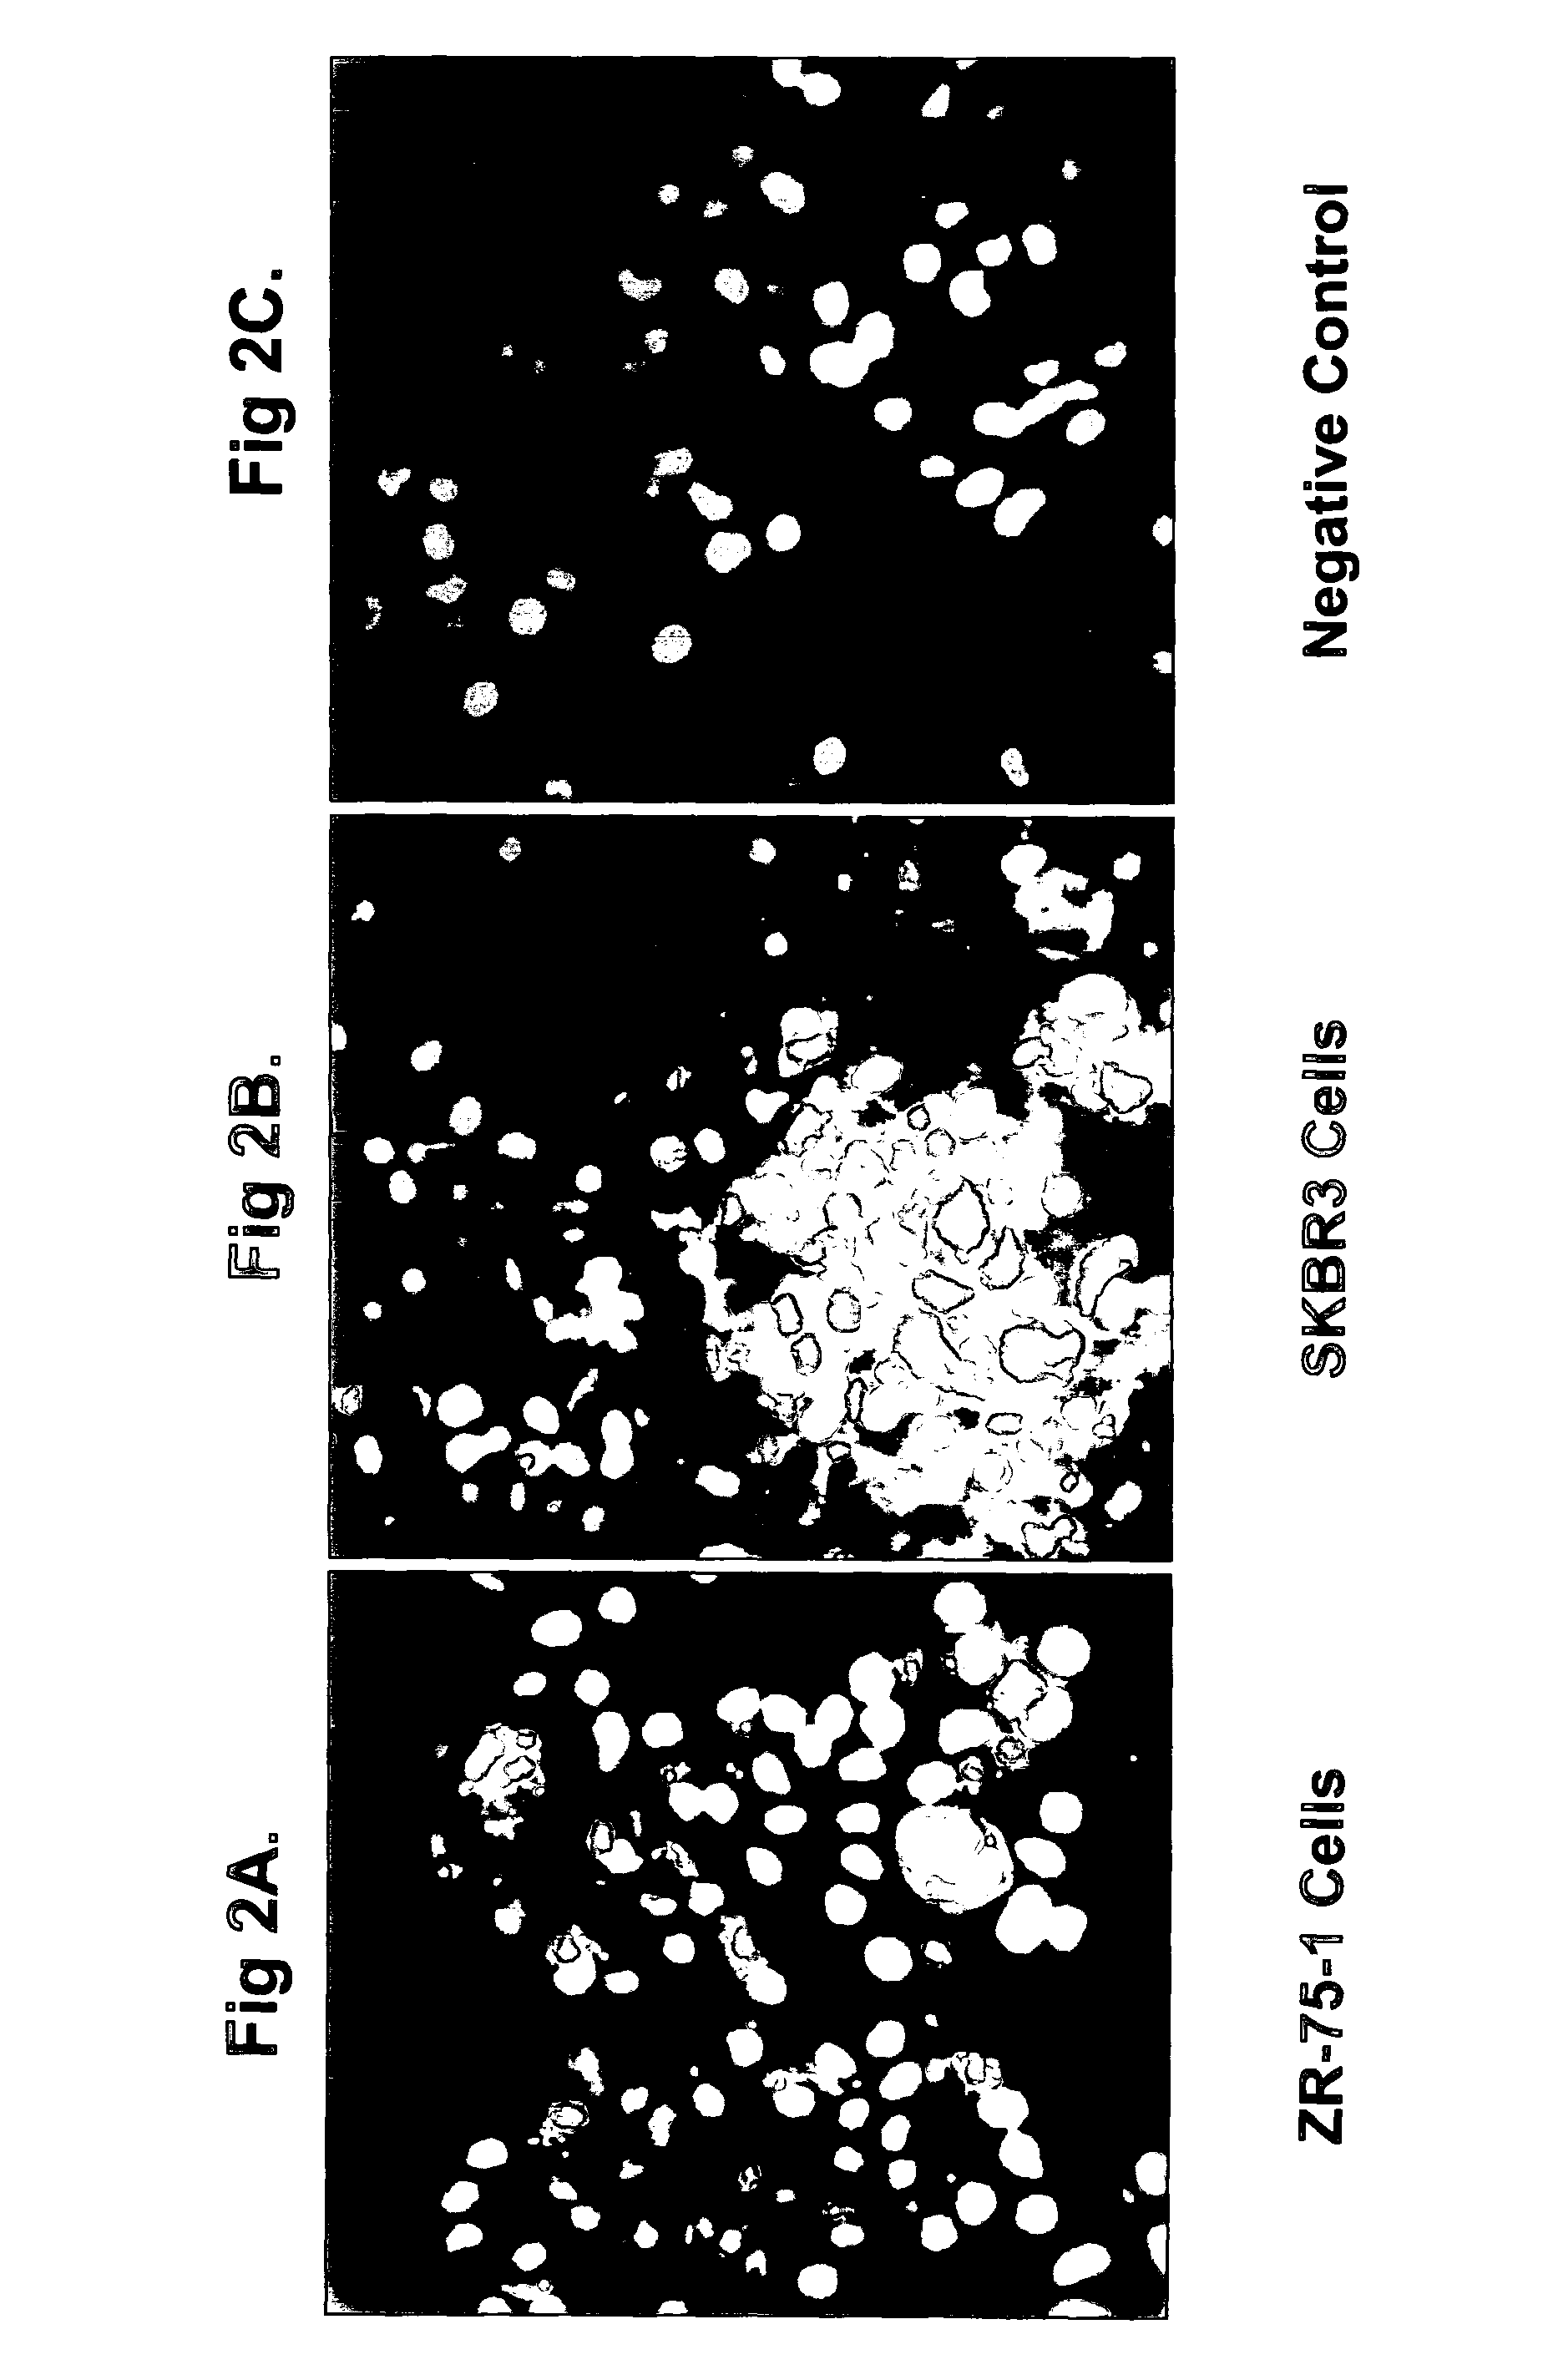 OVR110 Antibody Compositions and Methods of Use